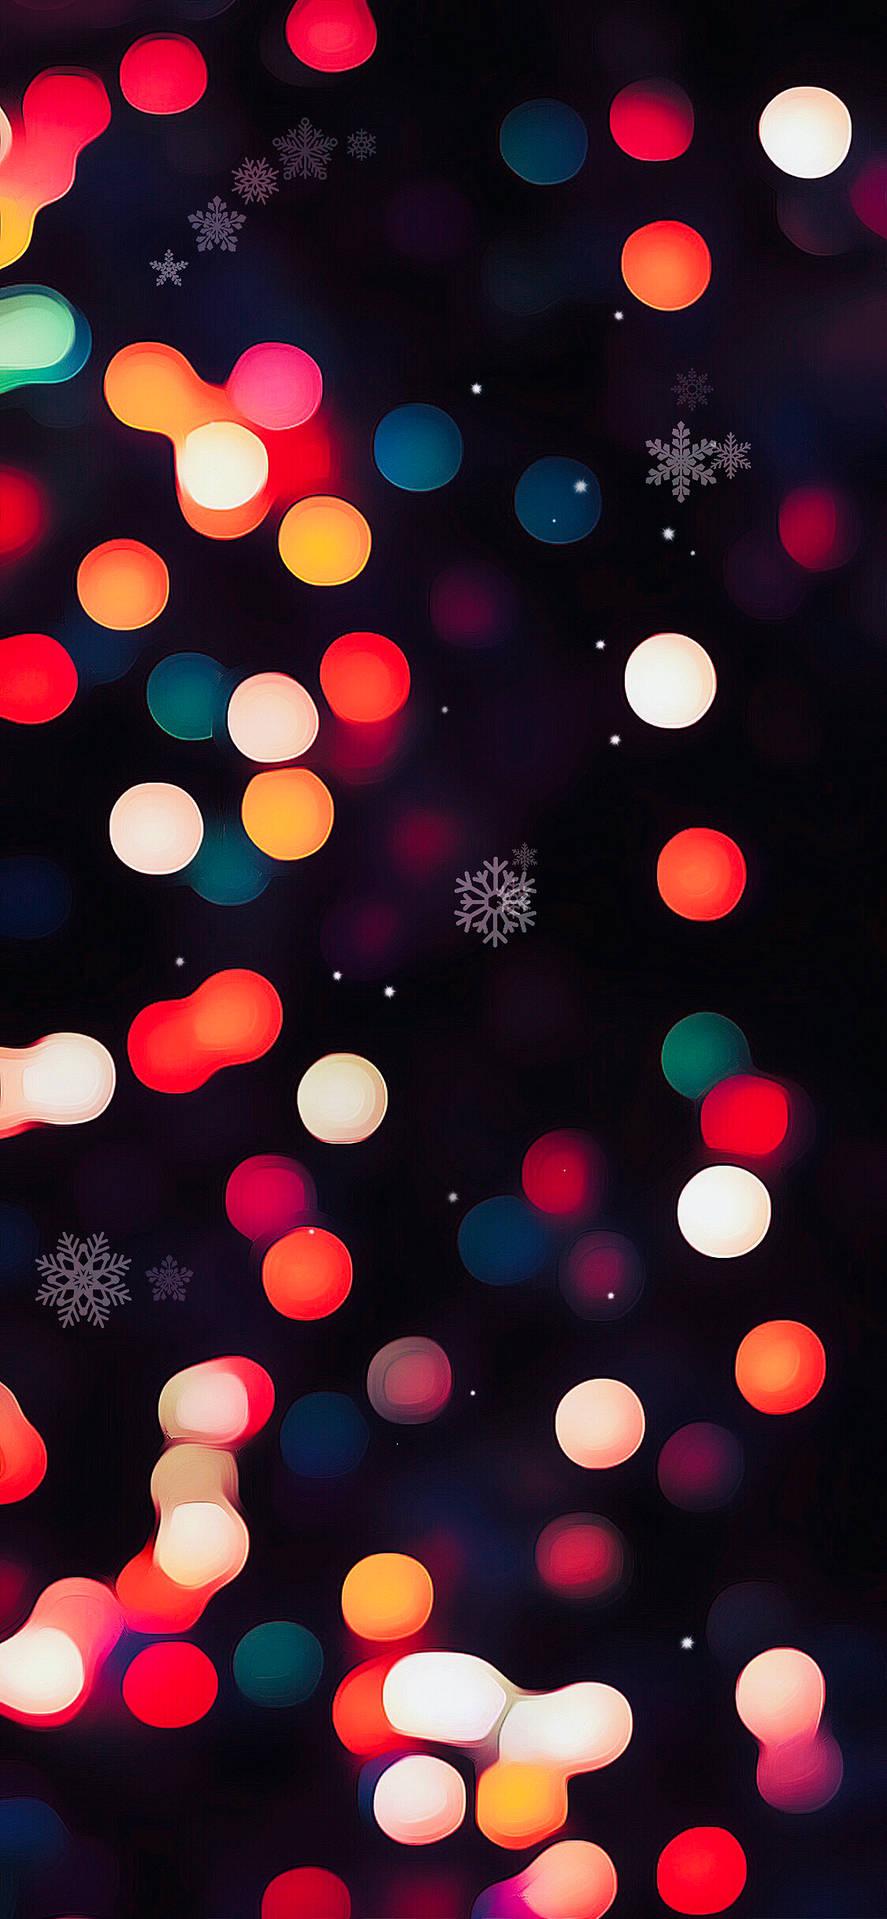 Download Christmas Lights IPhone Snowflakes Wallpaper